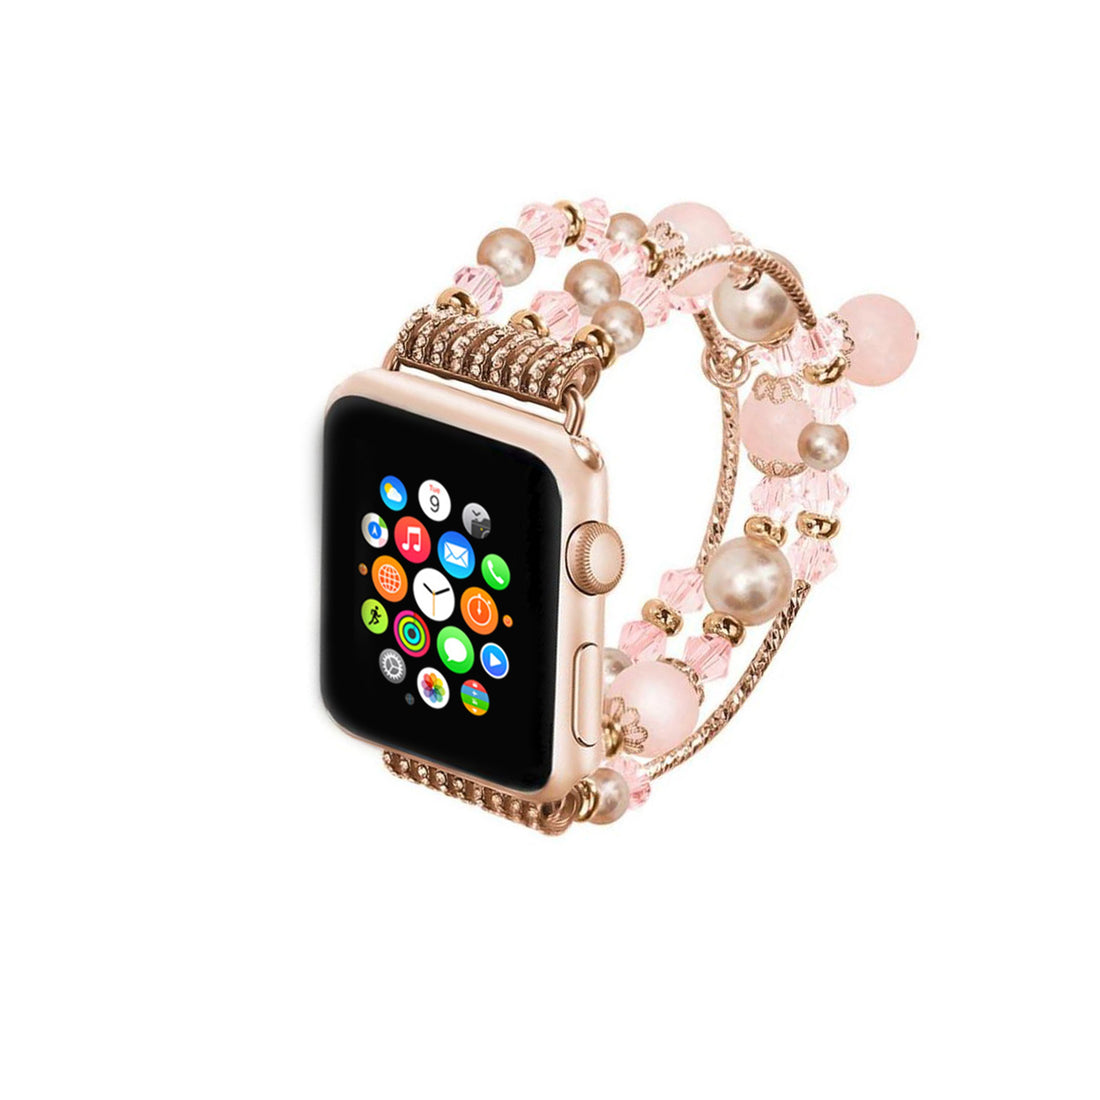 Jeweled Replacement Band for Apple Watch Series 1, 2, & 3